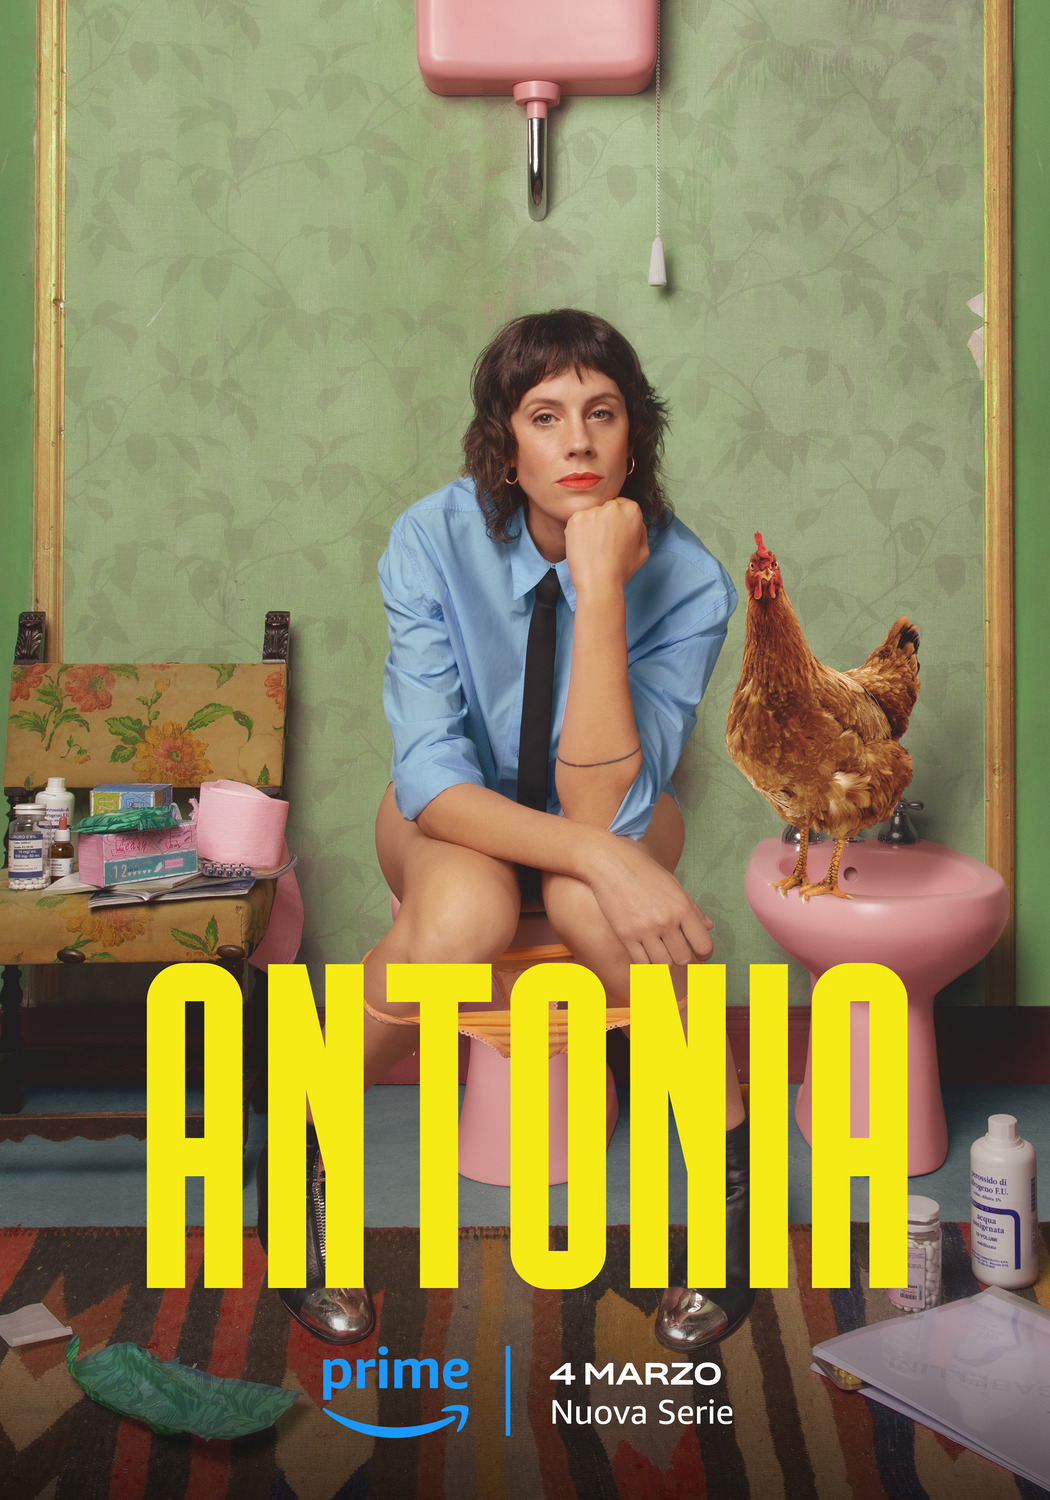 Extra Large TV Poster Image for Antonia 